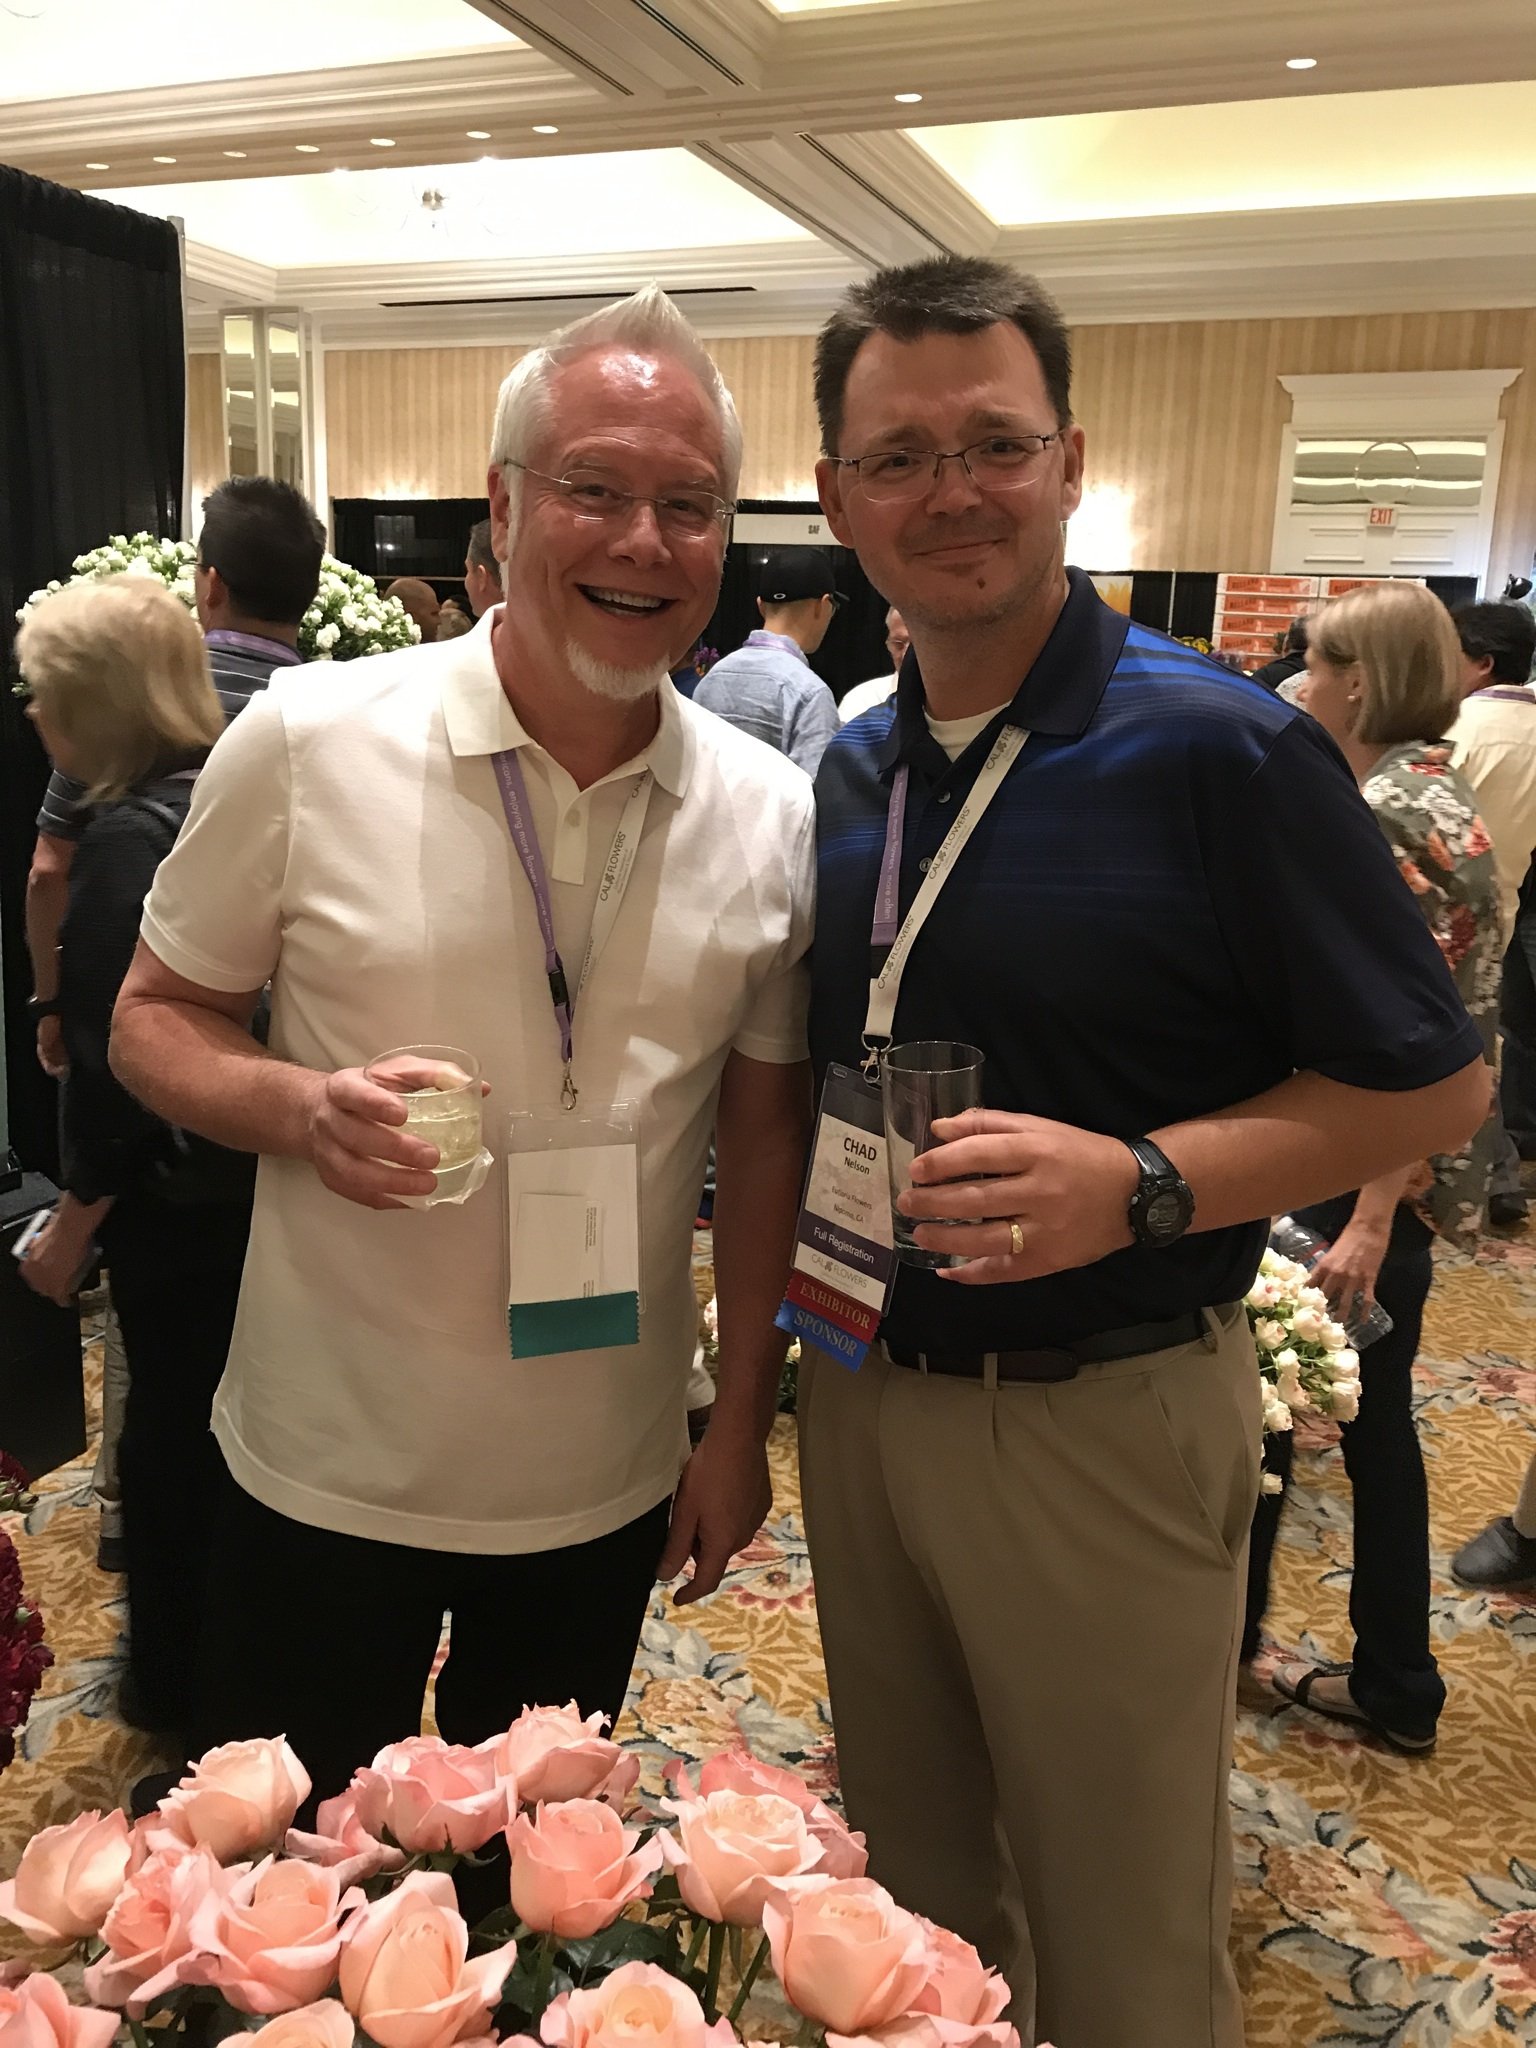 Chad from Eufloria Flowers visits with J Schwanke at the Fun N Sun Convention